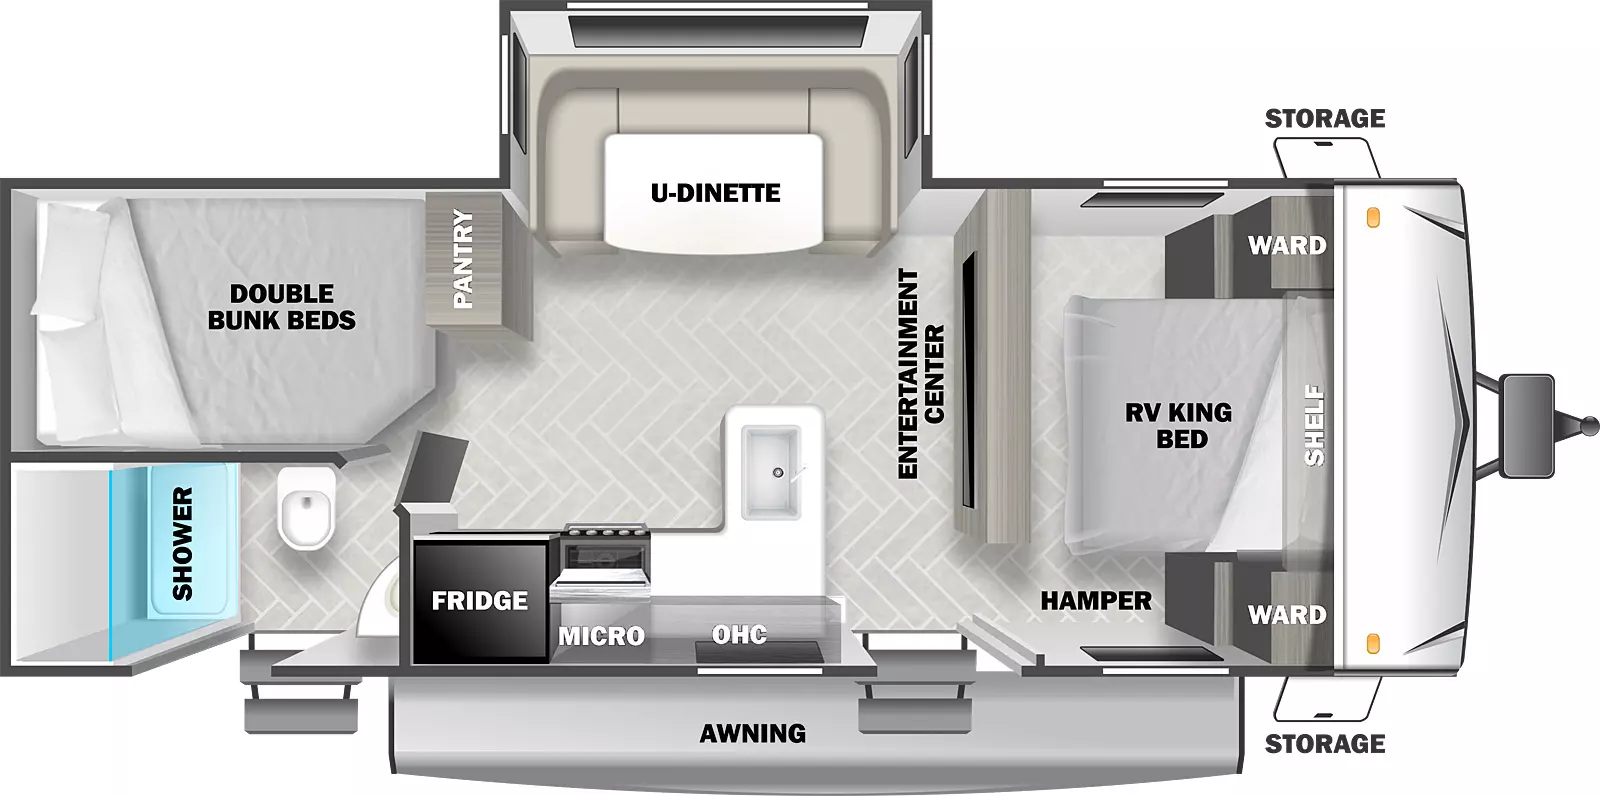 The T2490 has one slideout and two entries. Exterior features front storage, and an awning. Interior layout front to back: RV king bed with shelf above and wardrobes on each side, and hamper on door side; entertainment center along inner wall; door side entry, peninsula kitchen counter with sink wraps to door side with overhead cabinet, microwave, cooktop and refrigerator; off-door side slideout with u-dinette, and a pantry; rear off-door side double bunk beds; rear door side full bathroom with second entry.